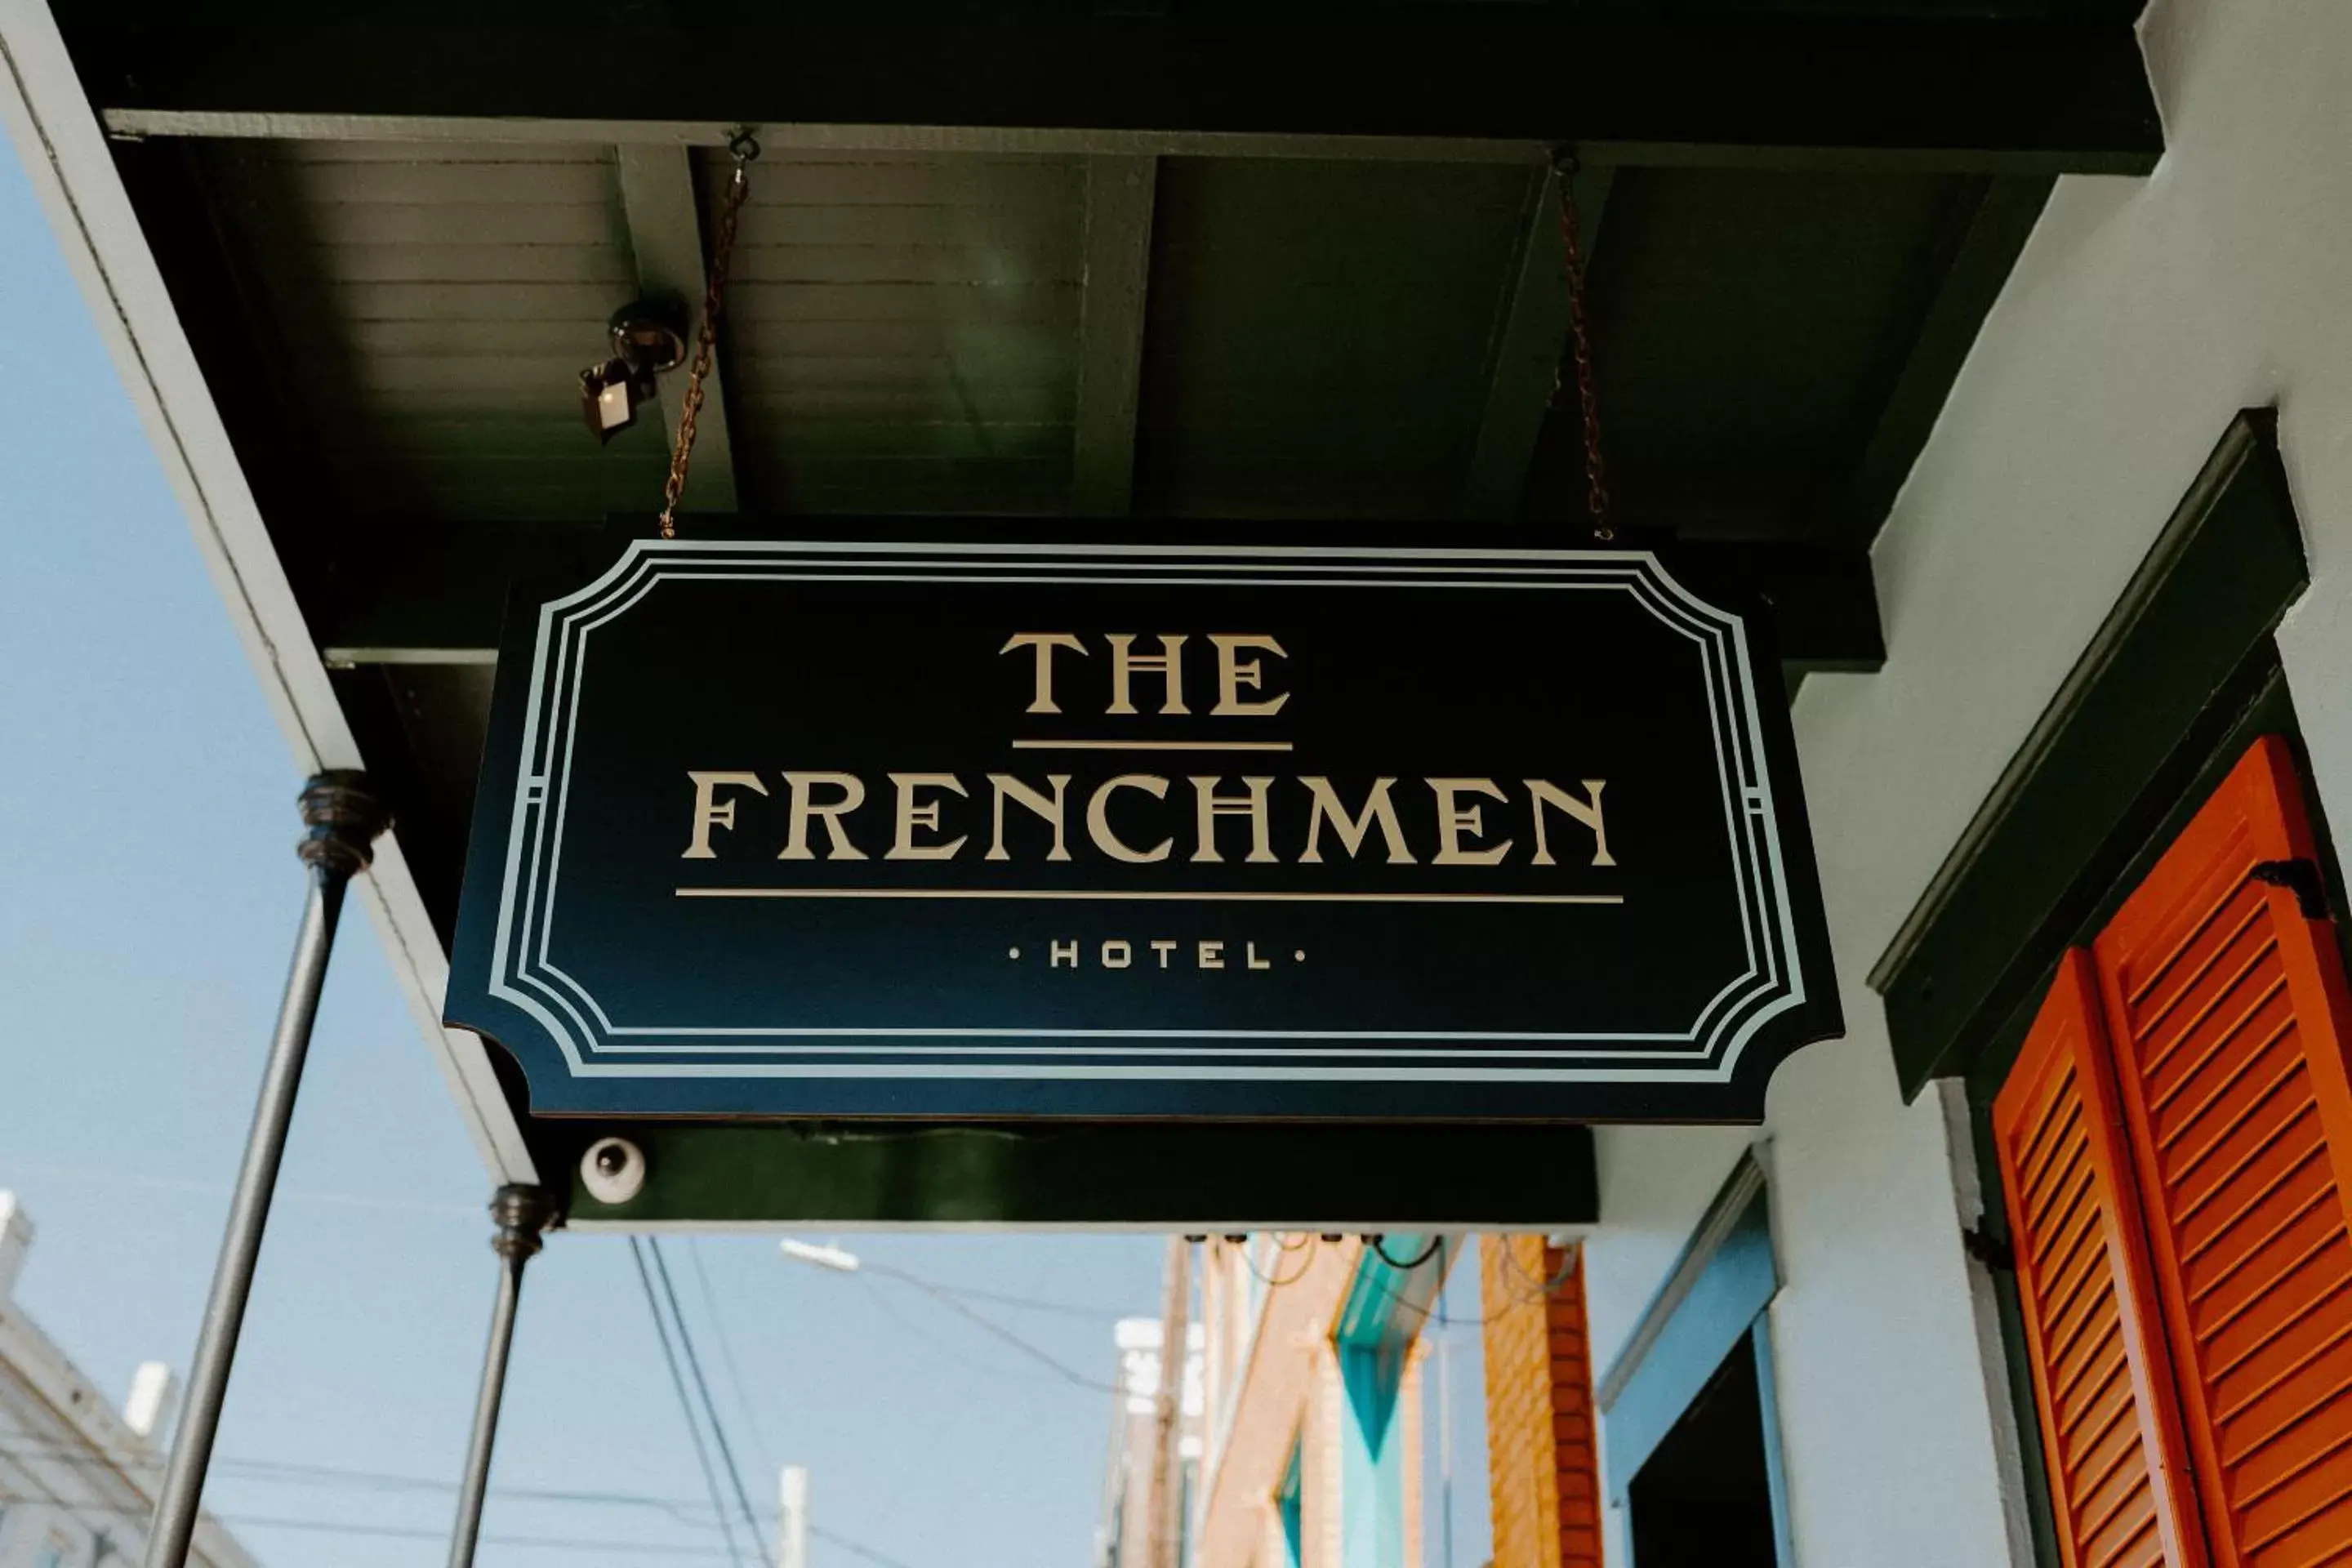 Property logo or sign in The Frenchmen